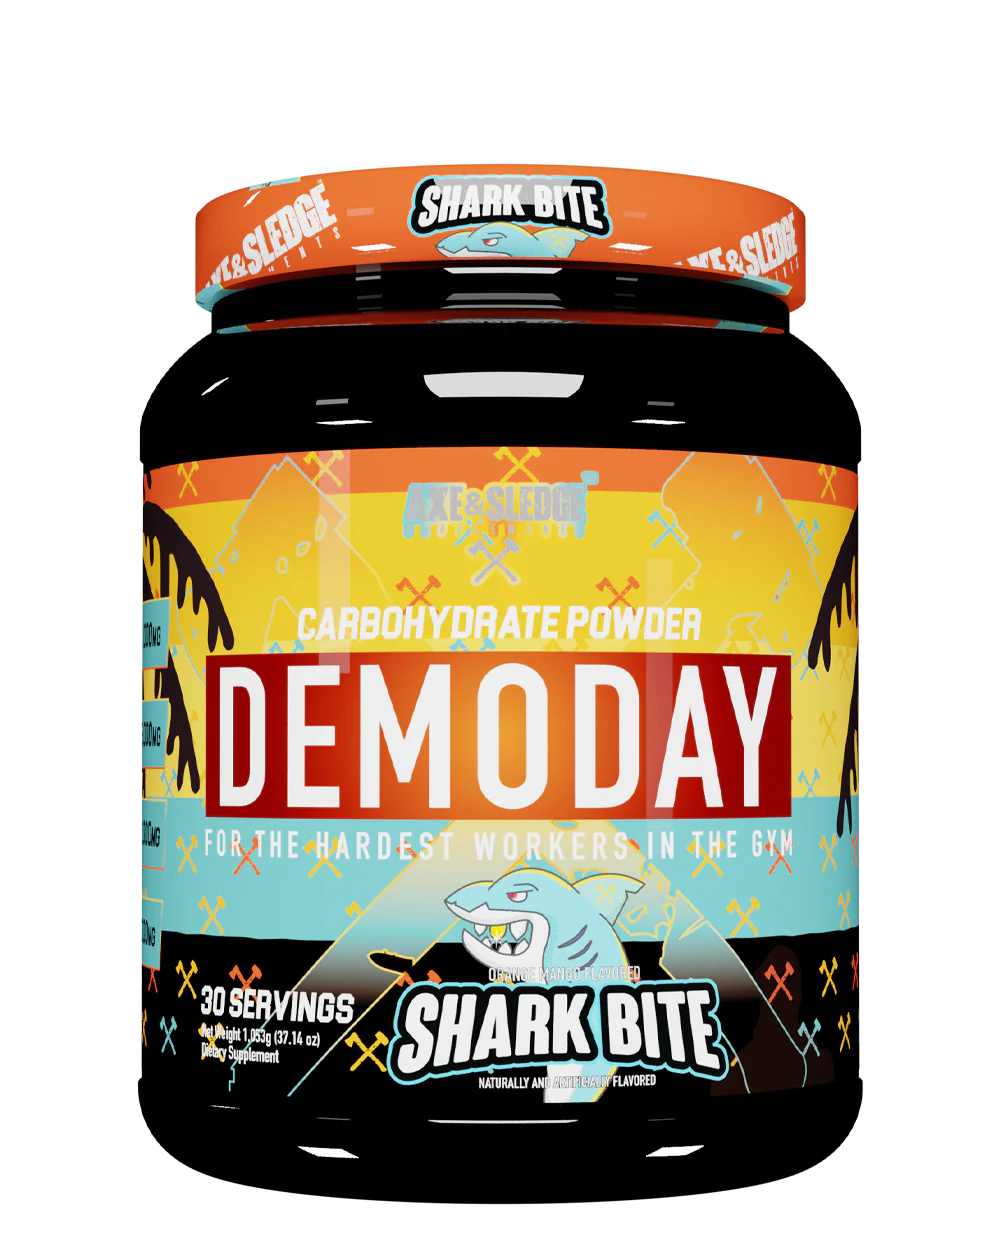 Demo Day by Axe and Sledge